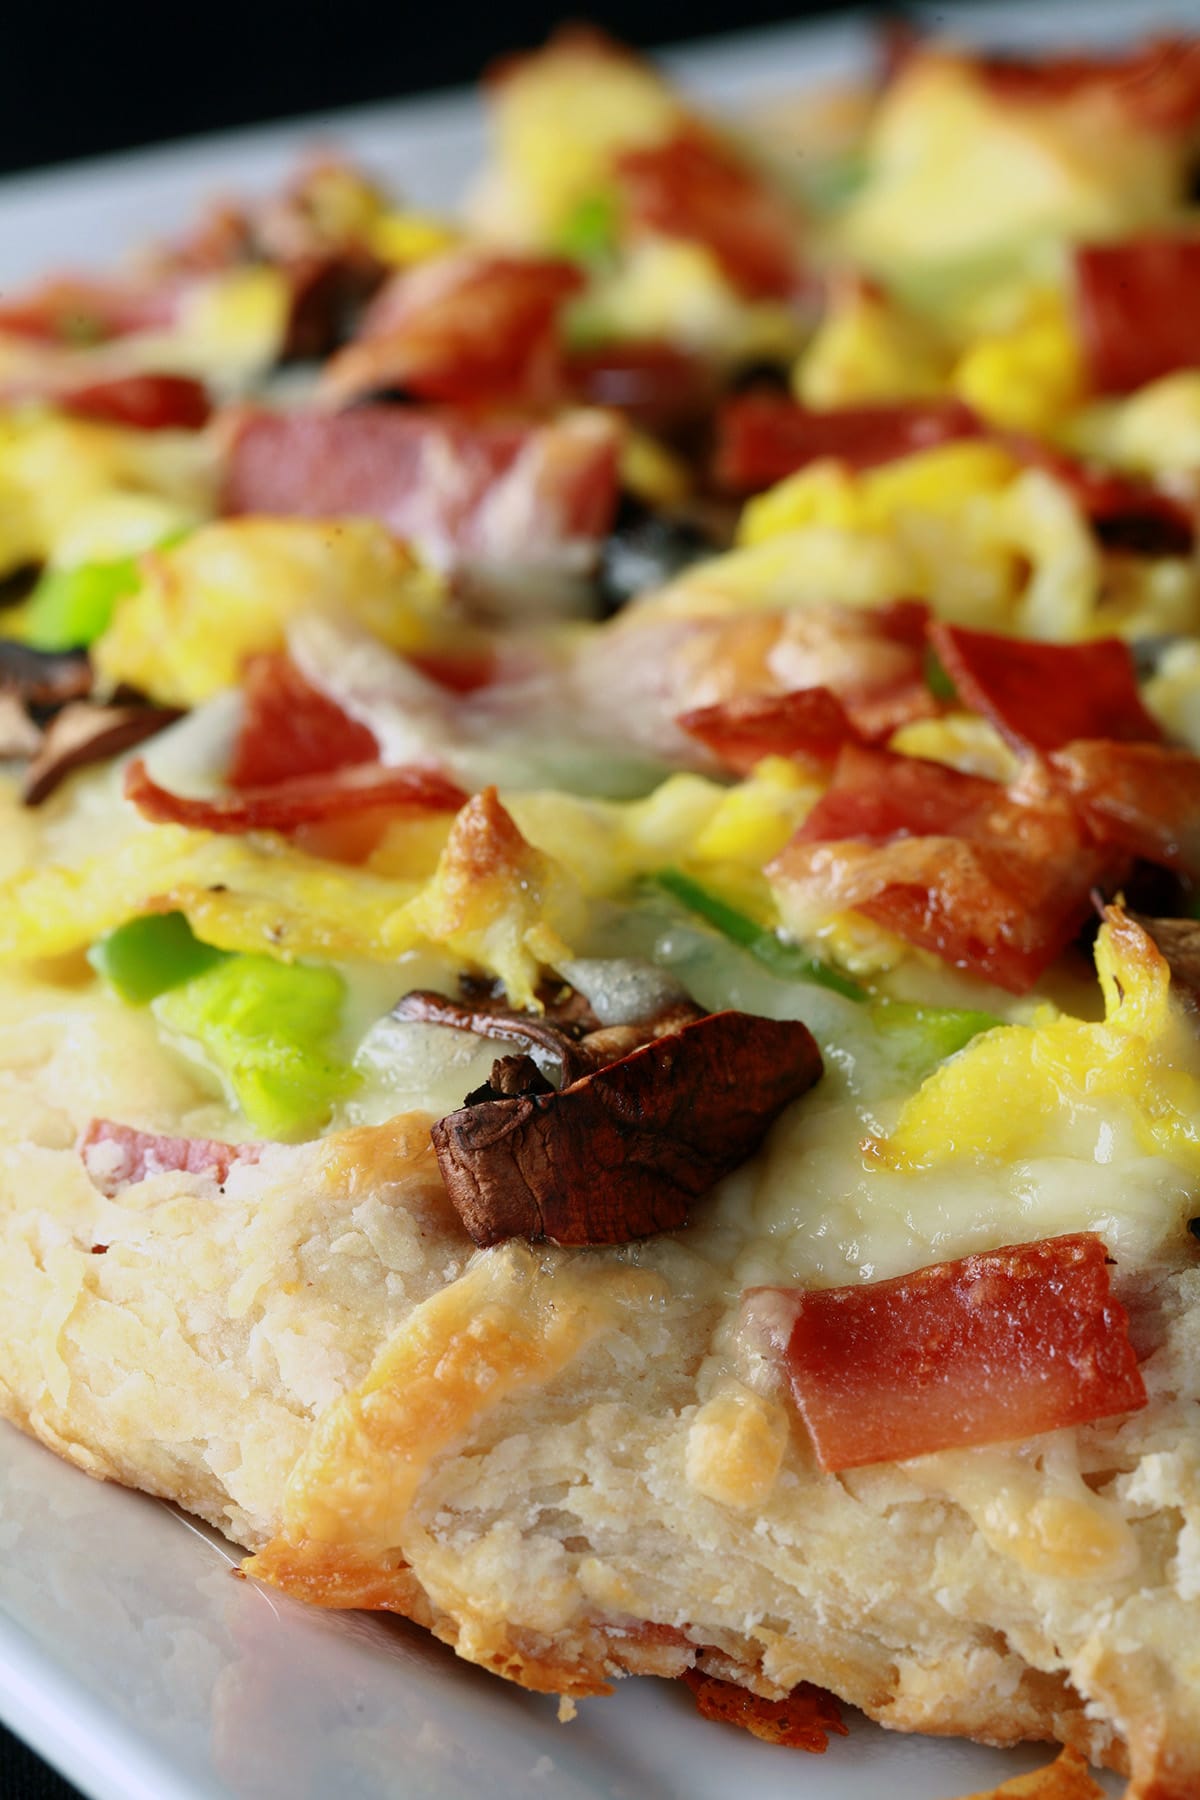 A large breakfast pizza.